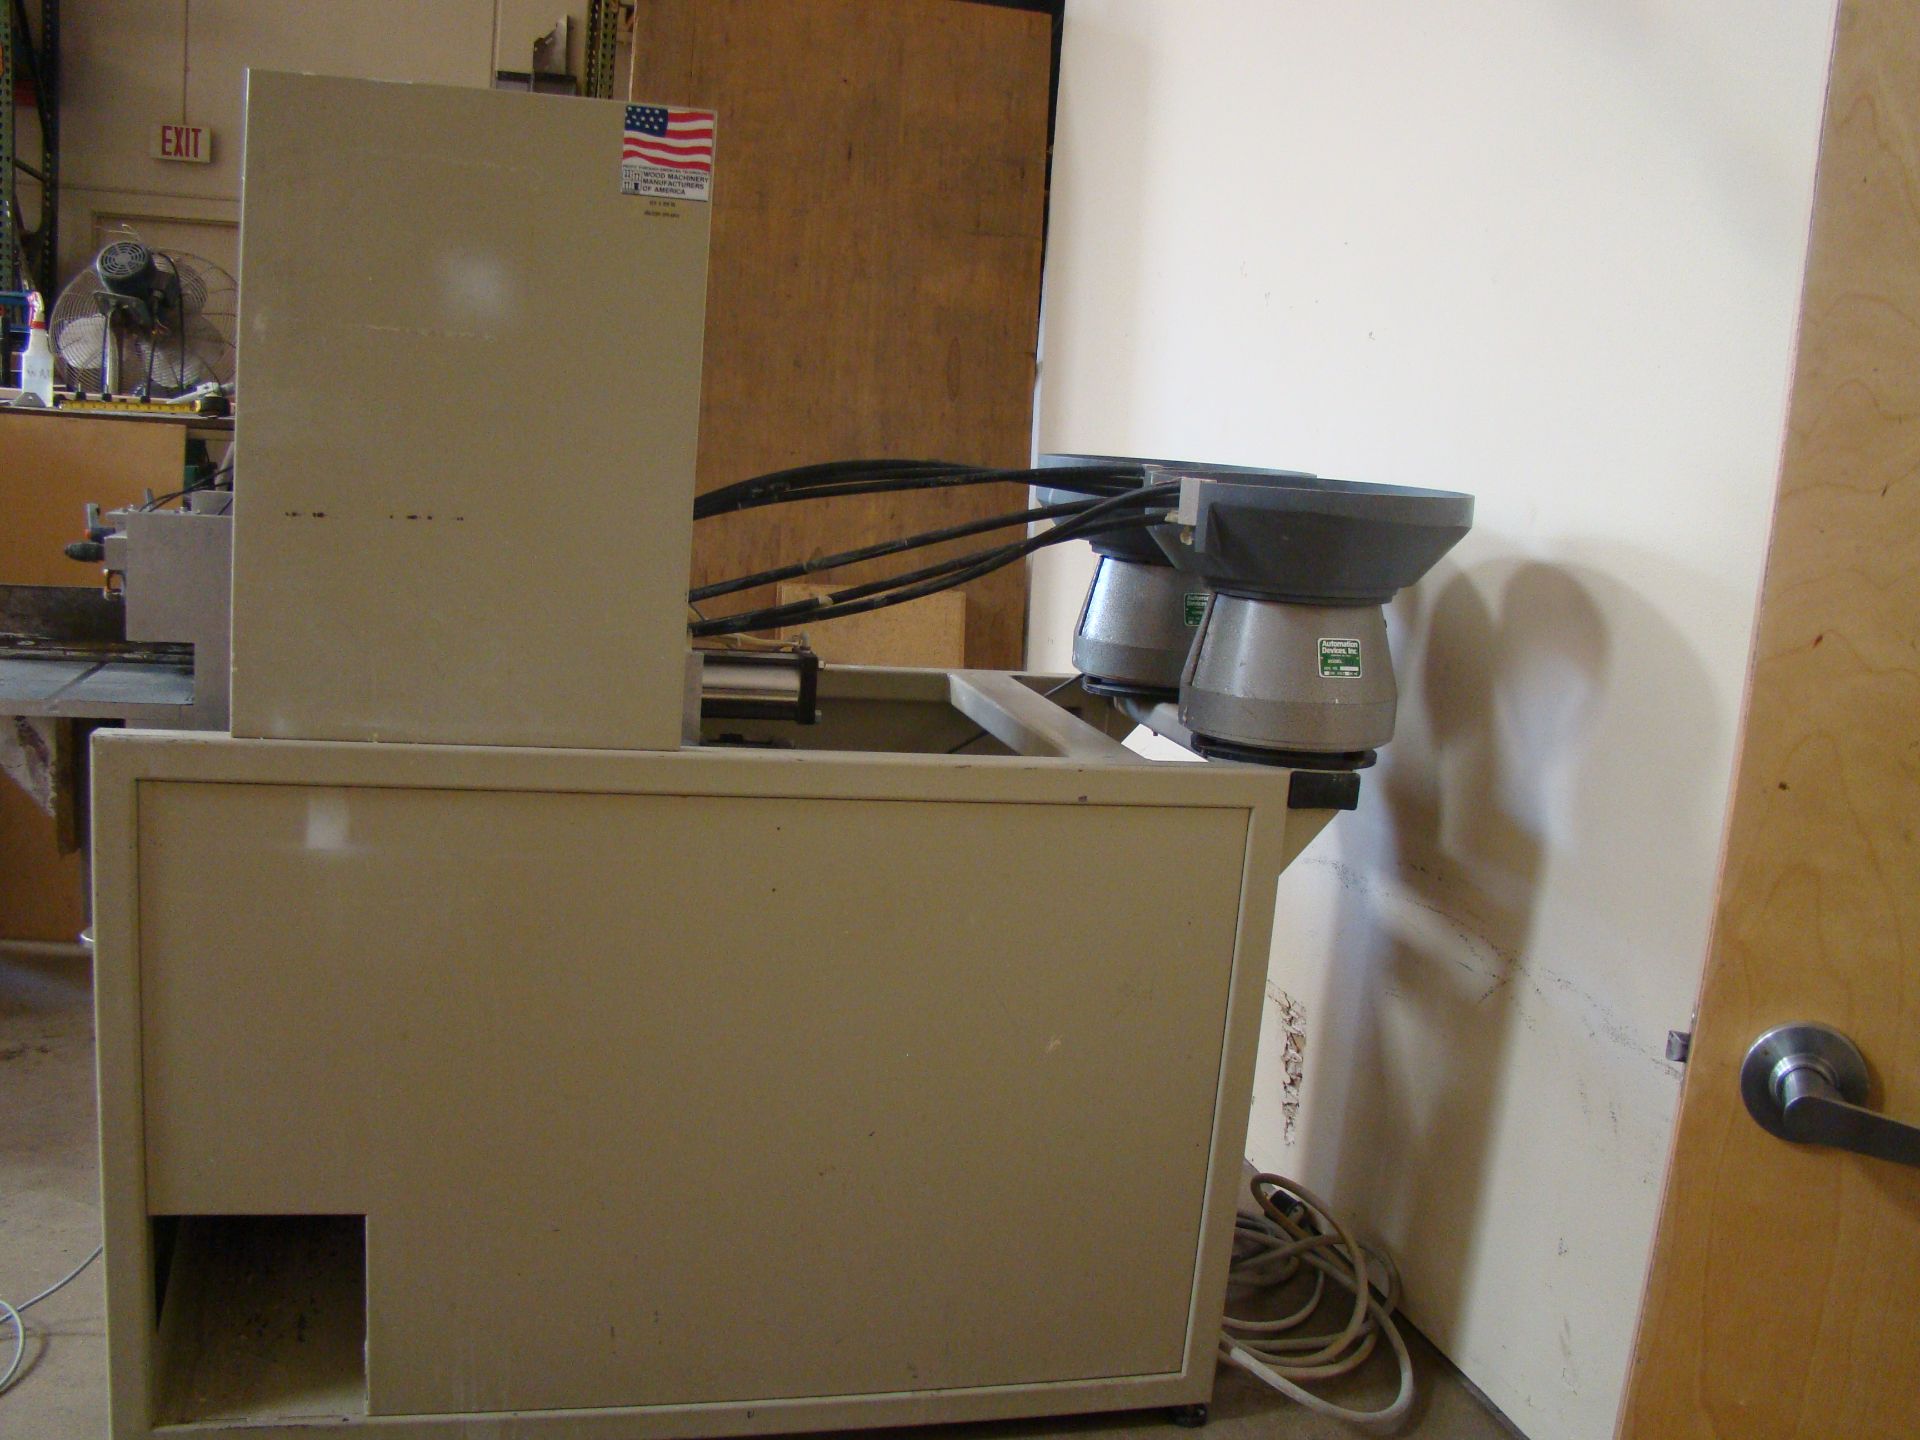 ACCU-Systems 366 Dowel Insertion Machine with Foot Pedal, Vibratory Bowl Feeders, Glue Pot 220 - Image 2 of 8